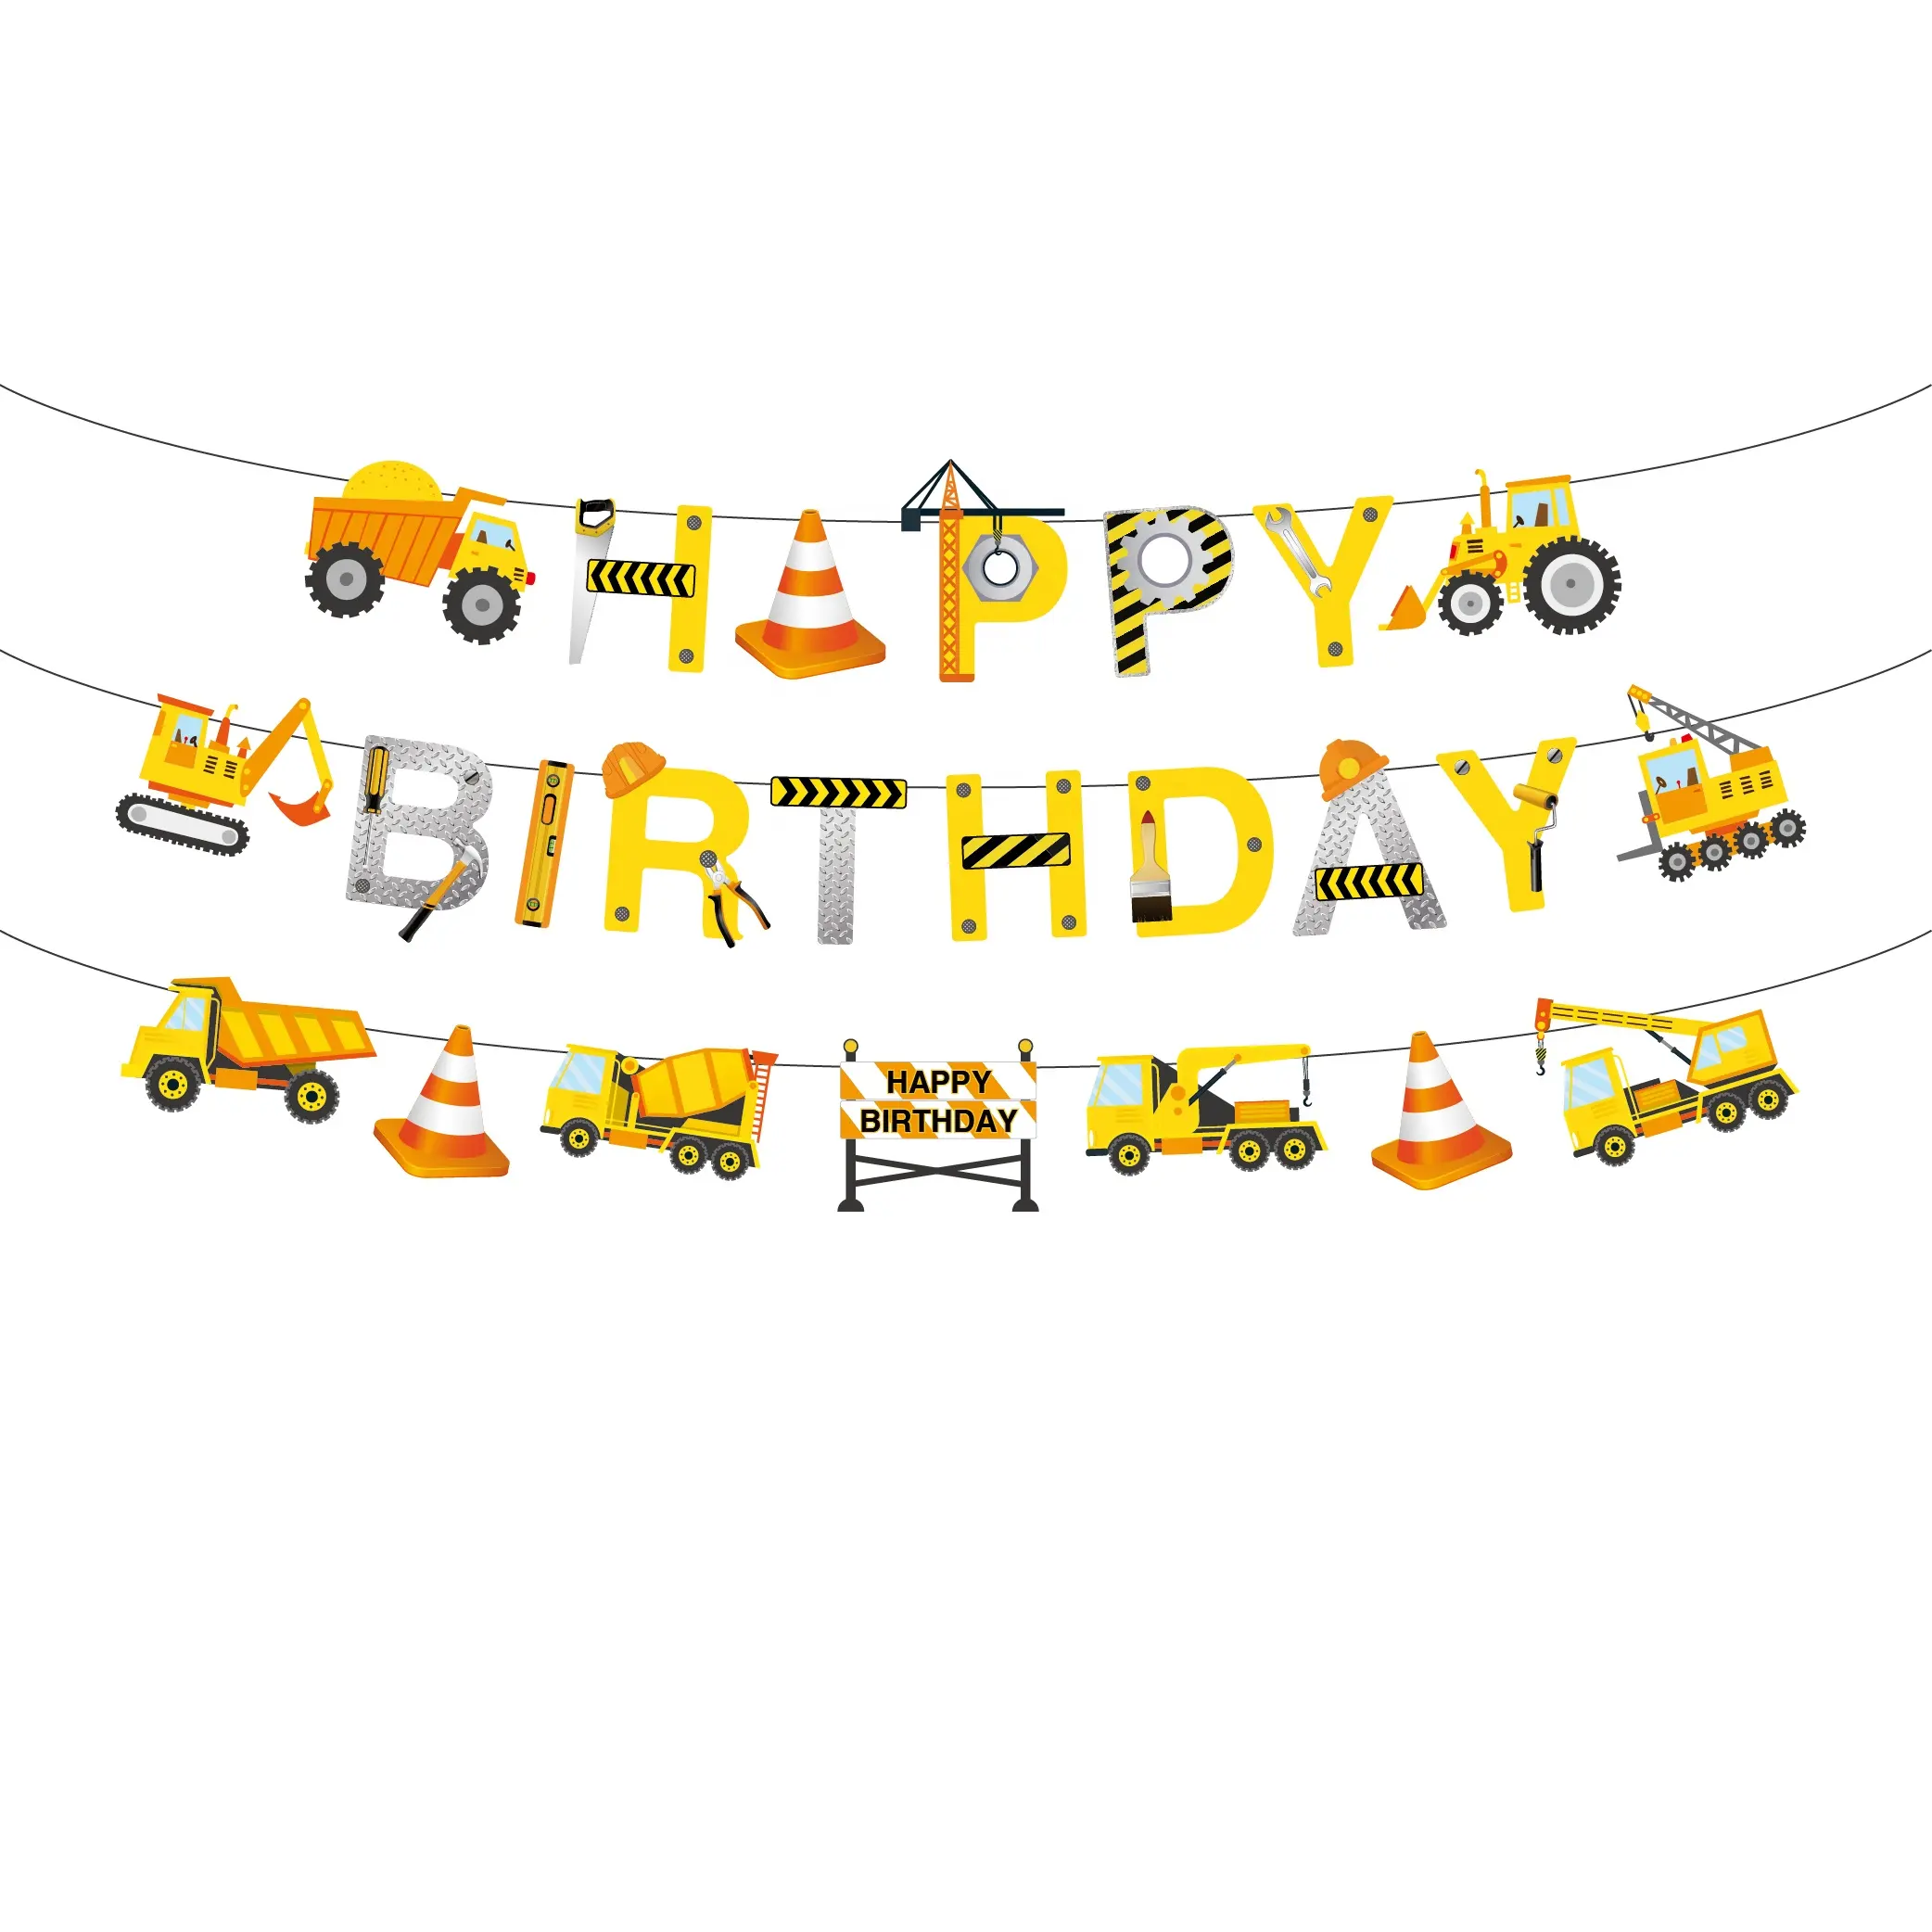 Huancai Construction HAPPY BIRTHDAY Banner truck excavator paper banner bunting for kids birthday party supplies decorations